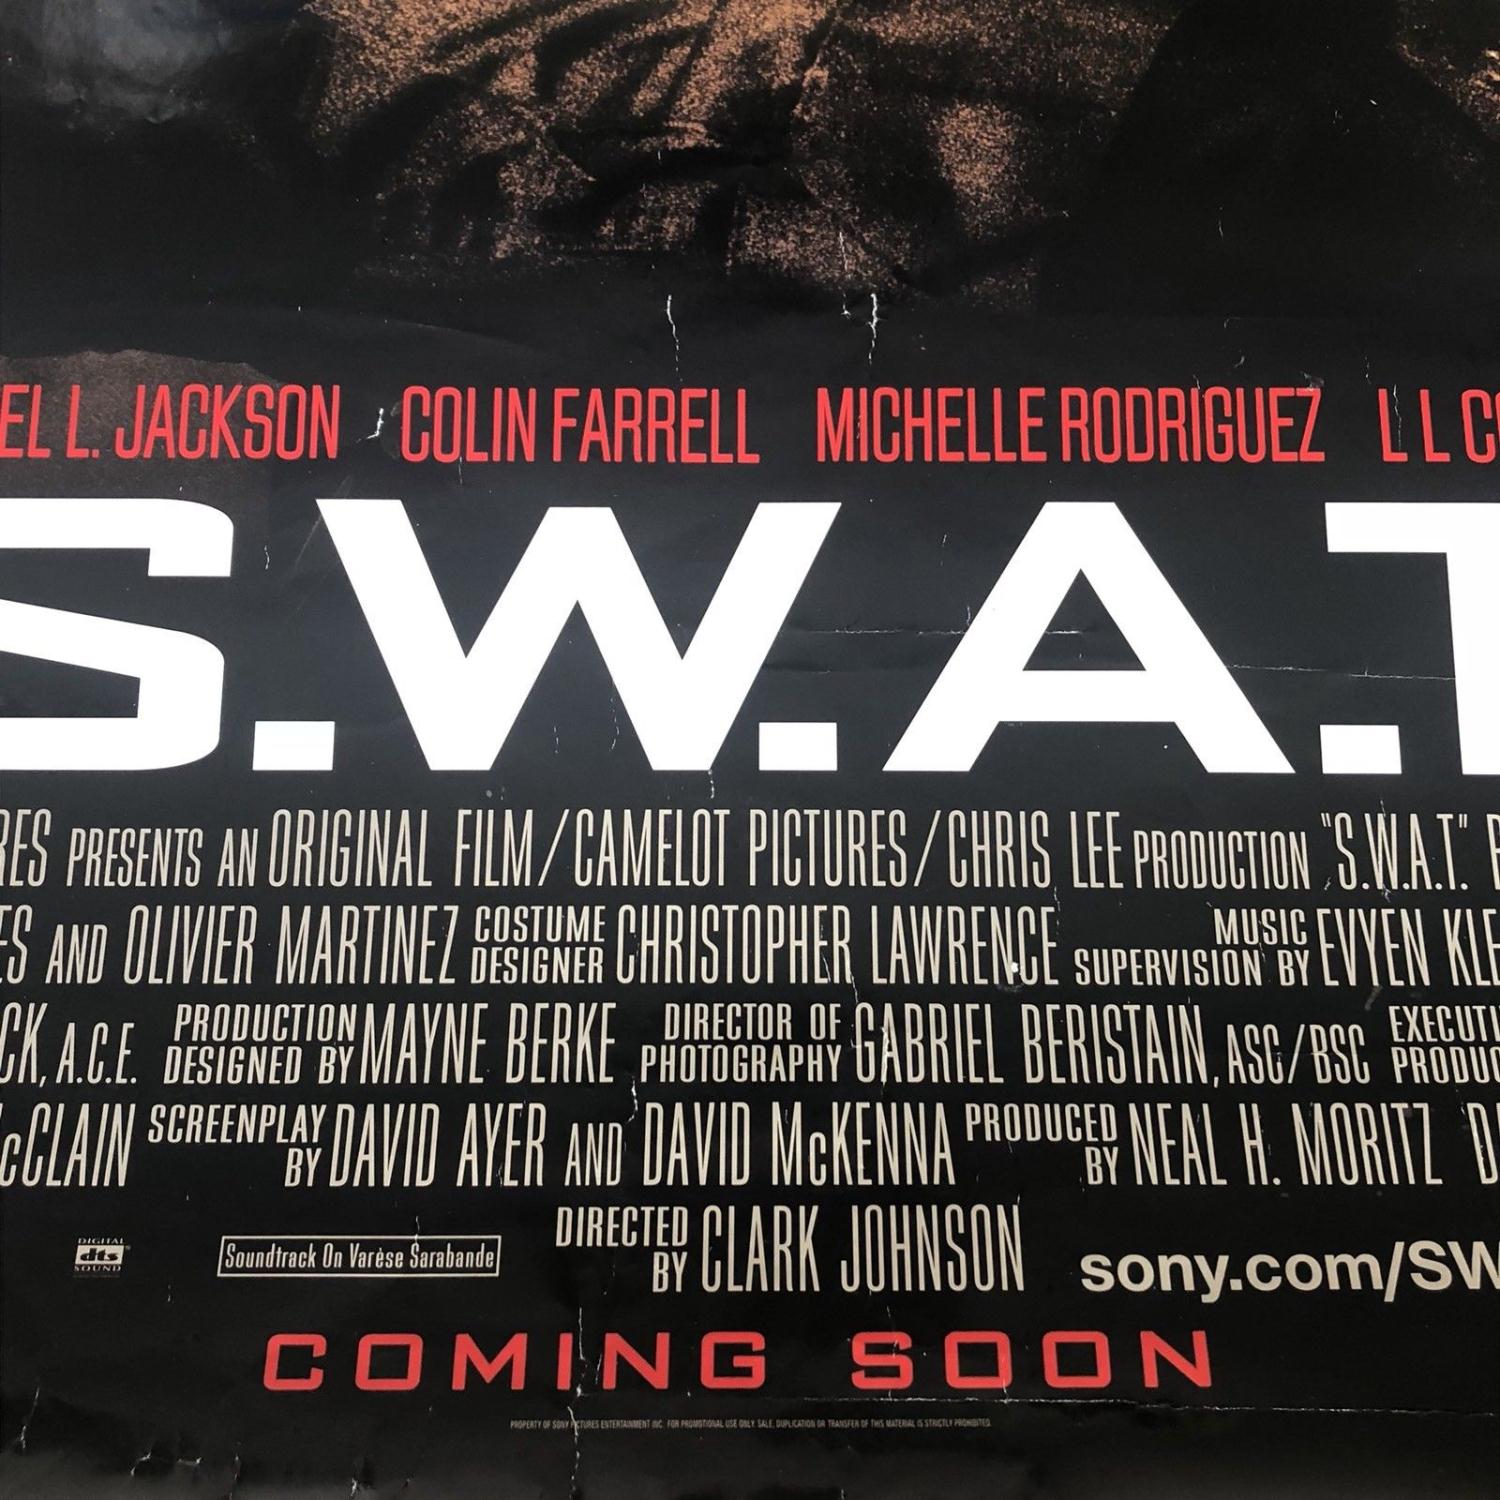 S.W.A.T CINEMA QUAD POSTER 2003 Samuel L Jackson Colin Farrell LAPD - Rolled - Image 2 of 3